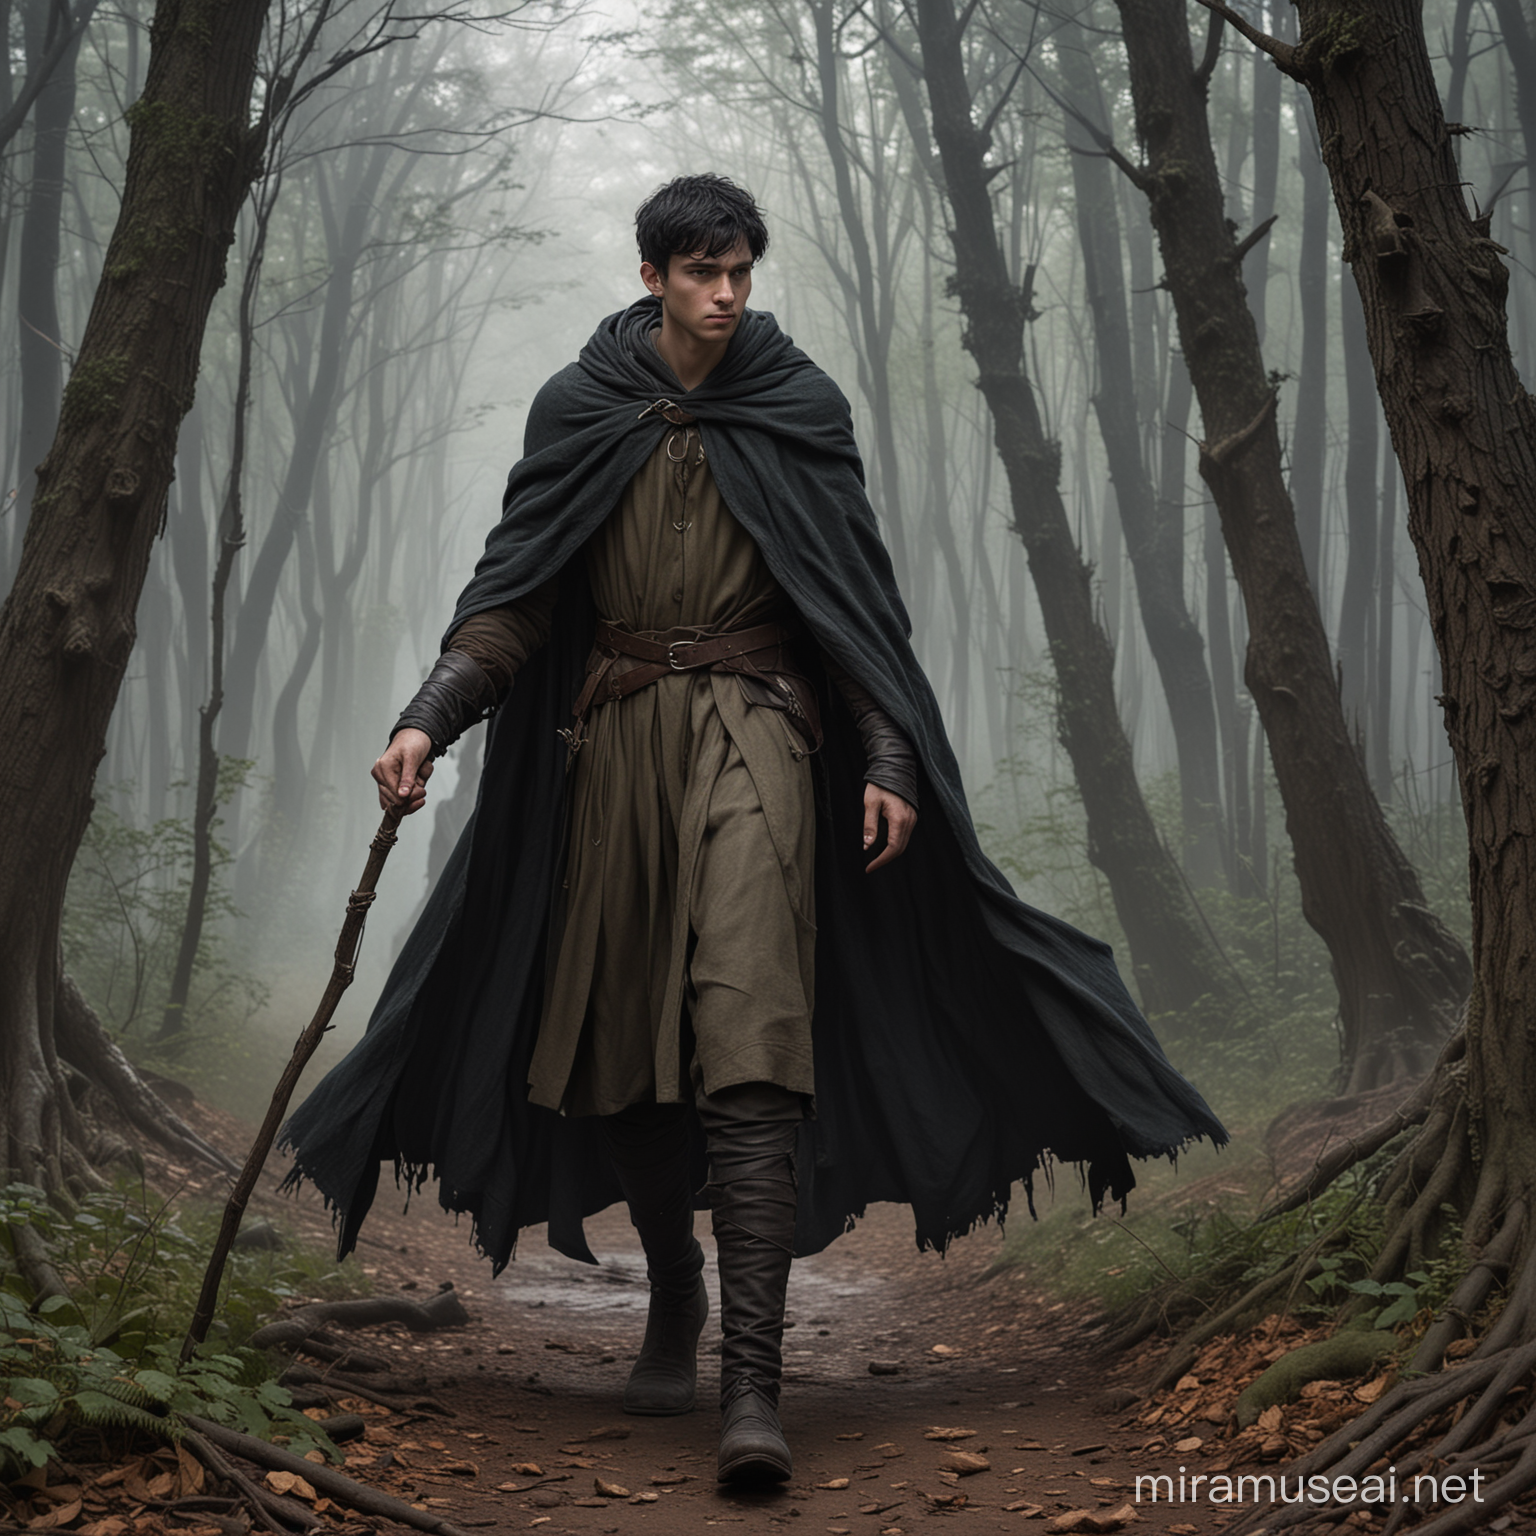 Thin young man, pale, short black hair, anxious, worried, wary, traveler's clothes, cloak, scarred hands, MtG art, Medieval fantasy art, forest, dark forest, woods, wandering, walking staff